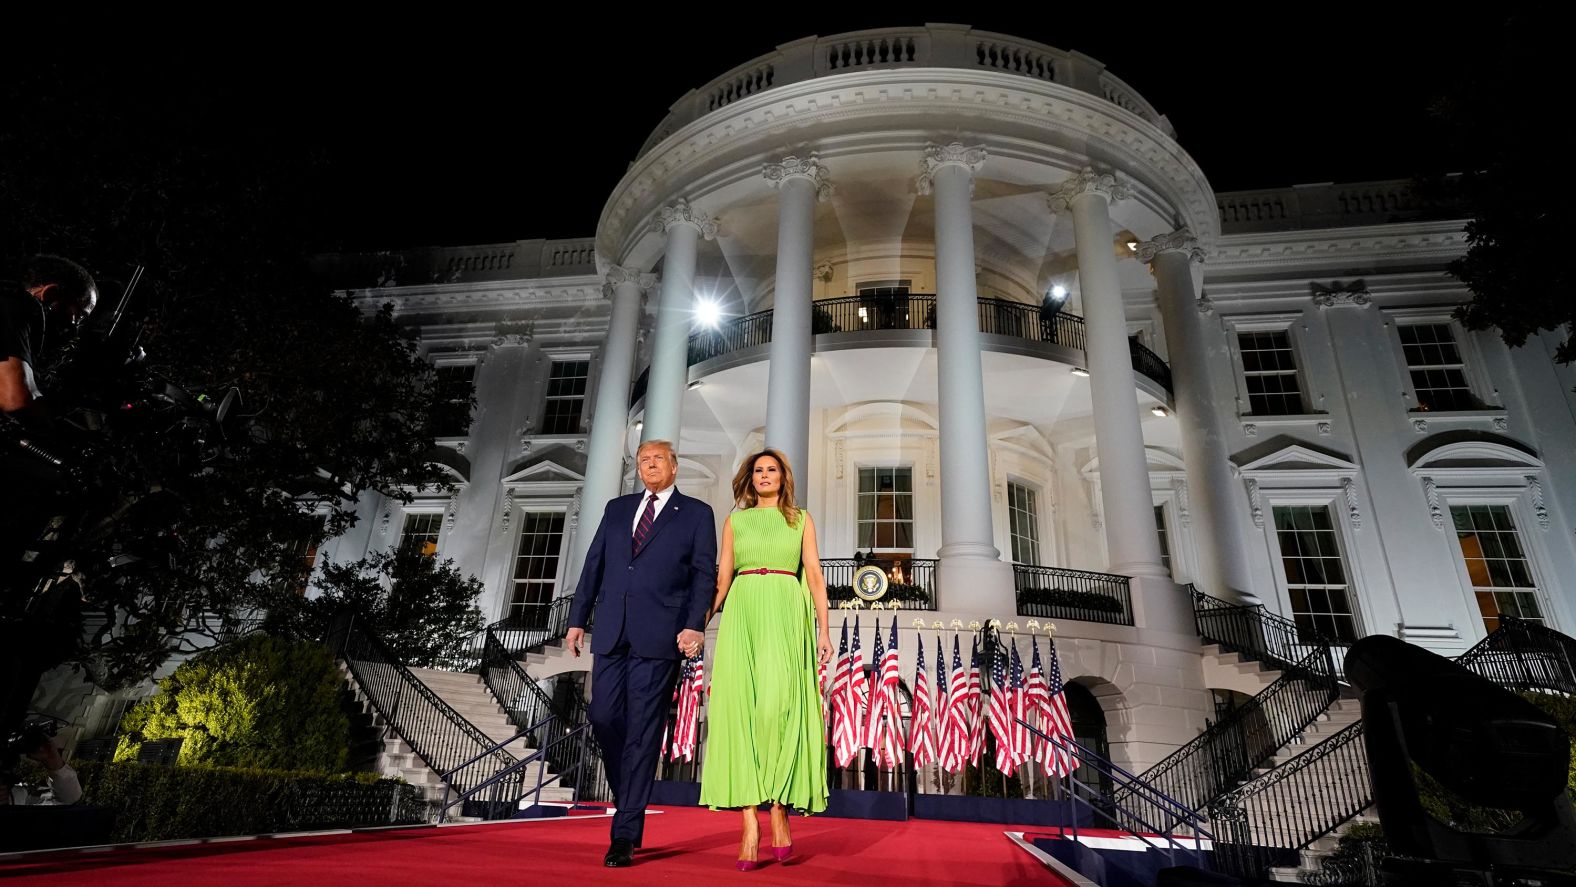 Trump is accompanied by the first lady as he arrives for <a href="index.php?page=&url=https%3A%2F%2Fwww.cnn.com%2F2020%2F08%2F27%2Fpolitics%2Fgop-convention-donald-trump-joe-biden%2Findex.html" target="_blank">his nomination acceptance speech</a> in August 2020. "I stand before you tonight honored by your support, proud of the extraordinary progress we have made together over the last four incredible years, and brimming with confidence in the bright future we will build for America over the next four years," Trump said in his speech, which closed the <a href="index.php?page=&url=http%3A%2F%2Fwww.cnn.com%2F2020%2F08%2F24%2Fpolitics%2Fgallery%2Frepublican-convention-2020%2Findex.html" target="_blank">Republican National Convention.</a>